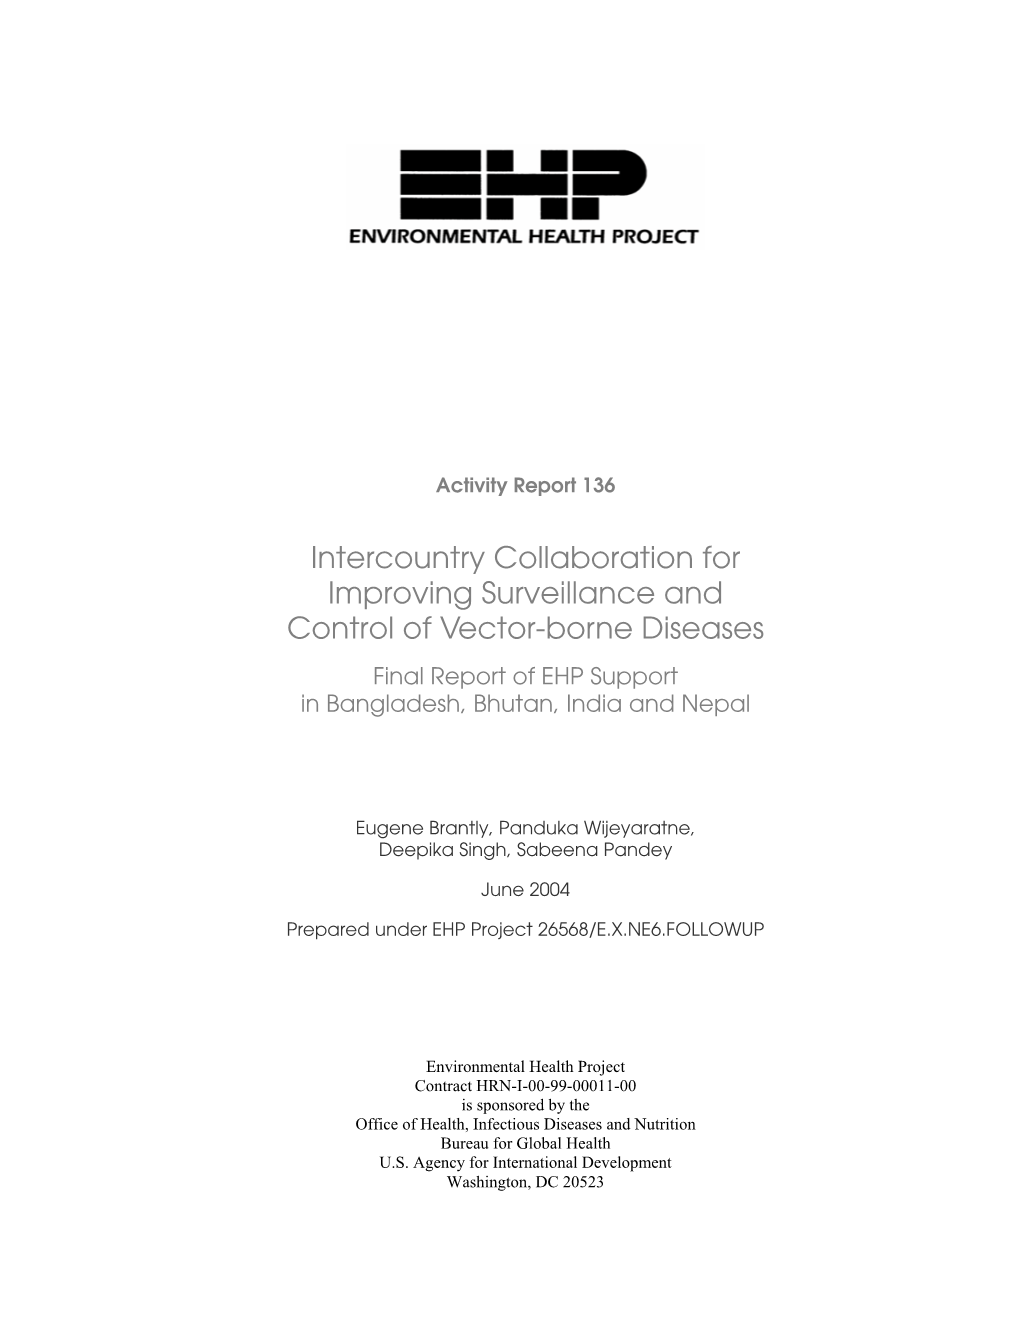 Intercountry Collaboration for Improving Surveillance and Control of Vector-Borne Diseases Final Report of EHP Support in Bangladesh, Bhutan, India and Nepal